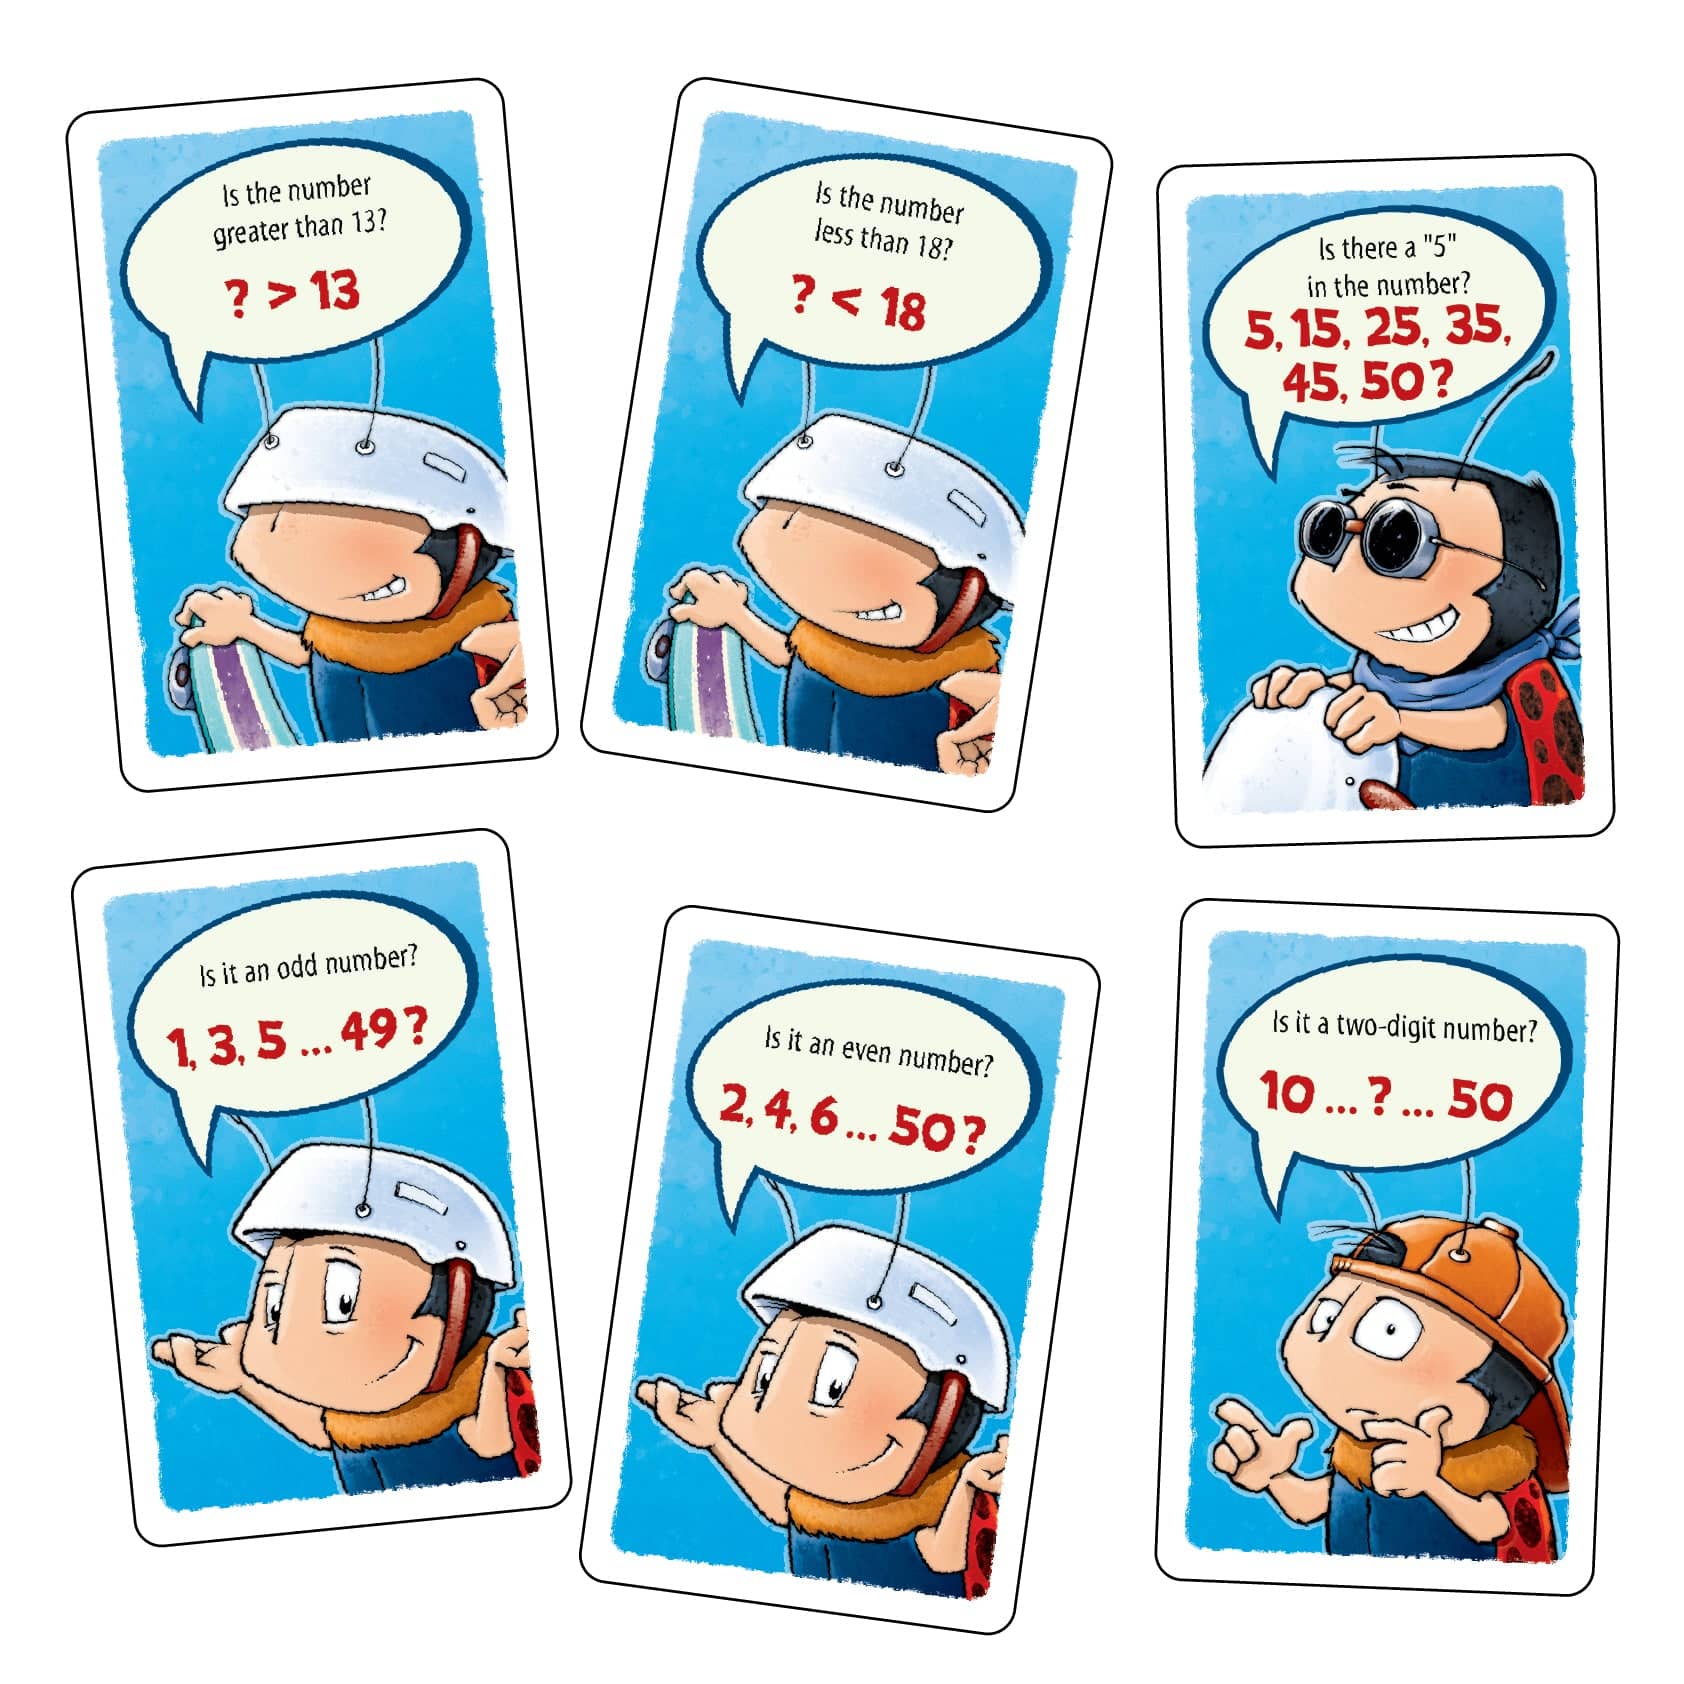 Number Chase | Card game to sharpen math skills for ages 6 and up | Ultra PRO Entertainment